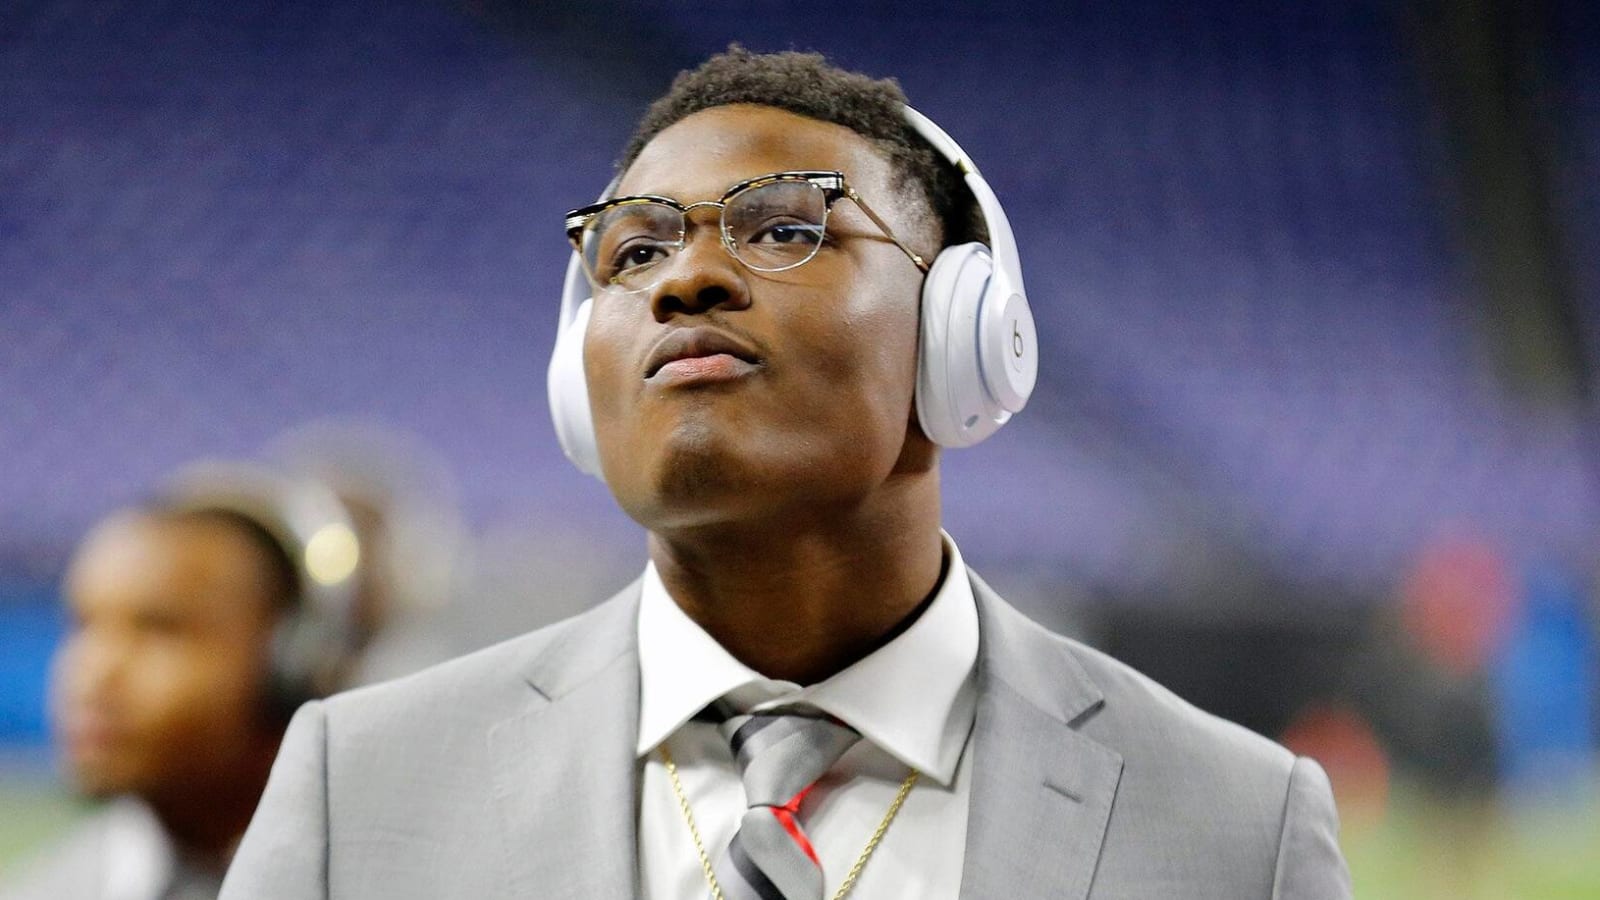 Ex-Ohio State teammate has cool tribute to Dwayne Haskins